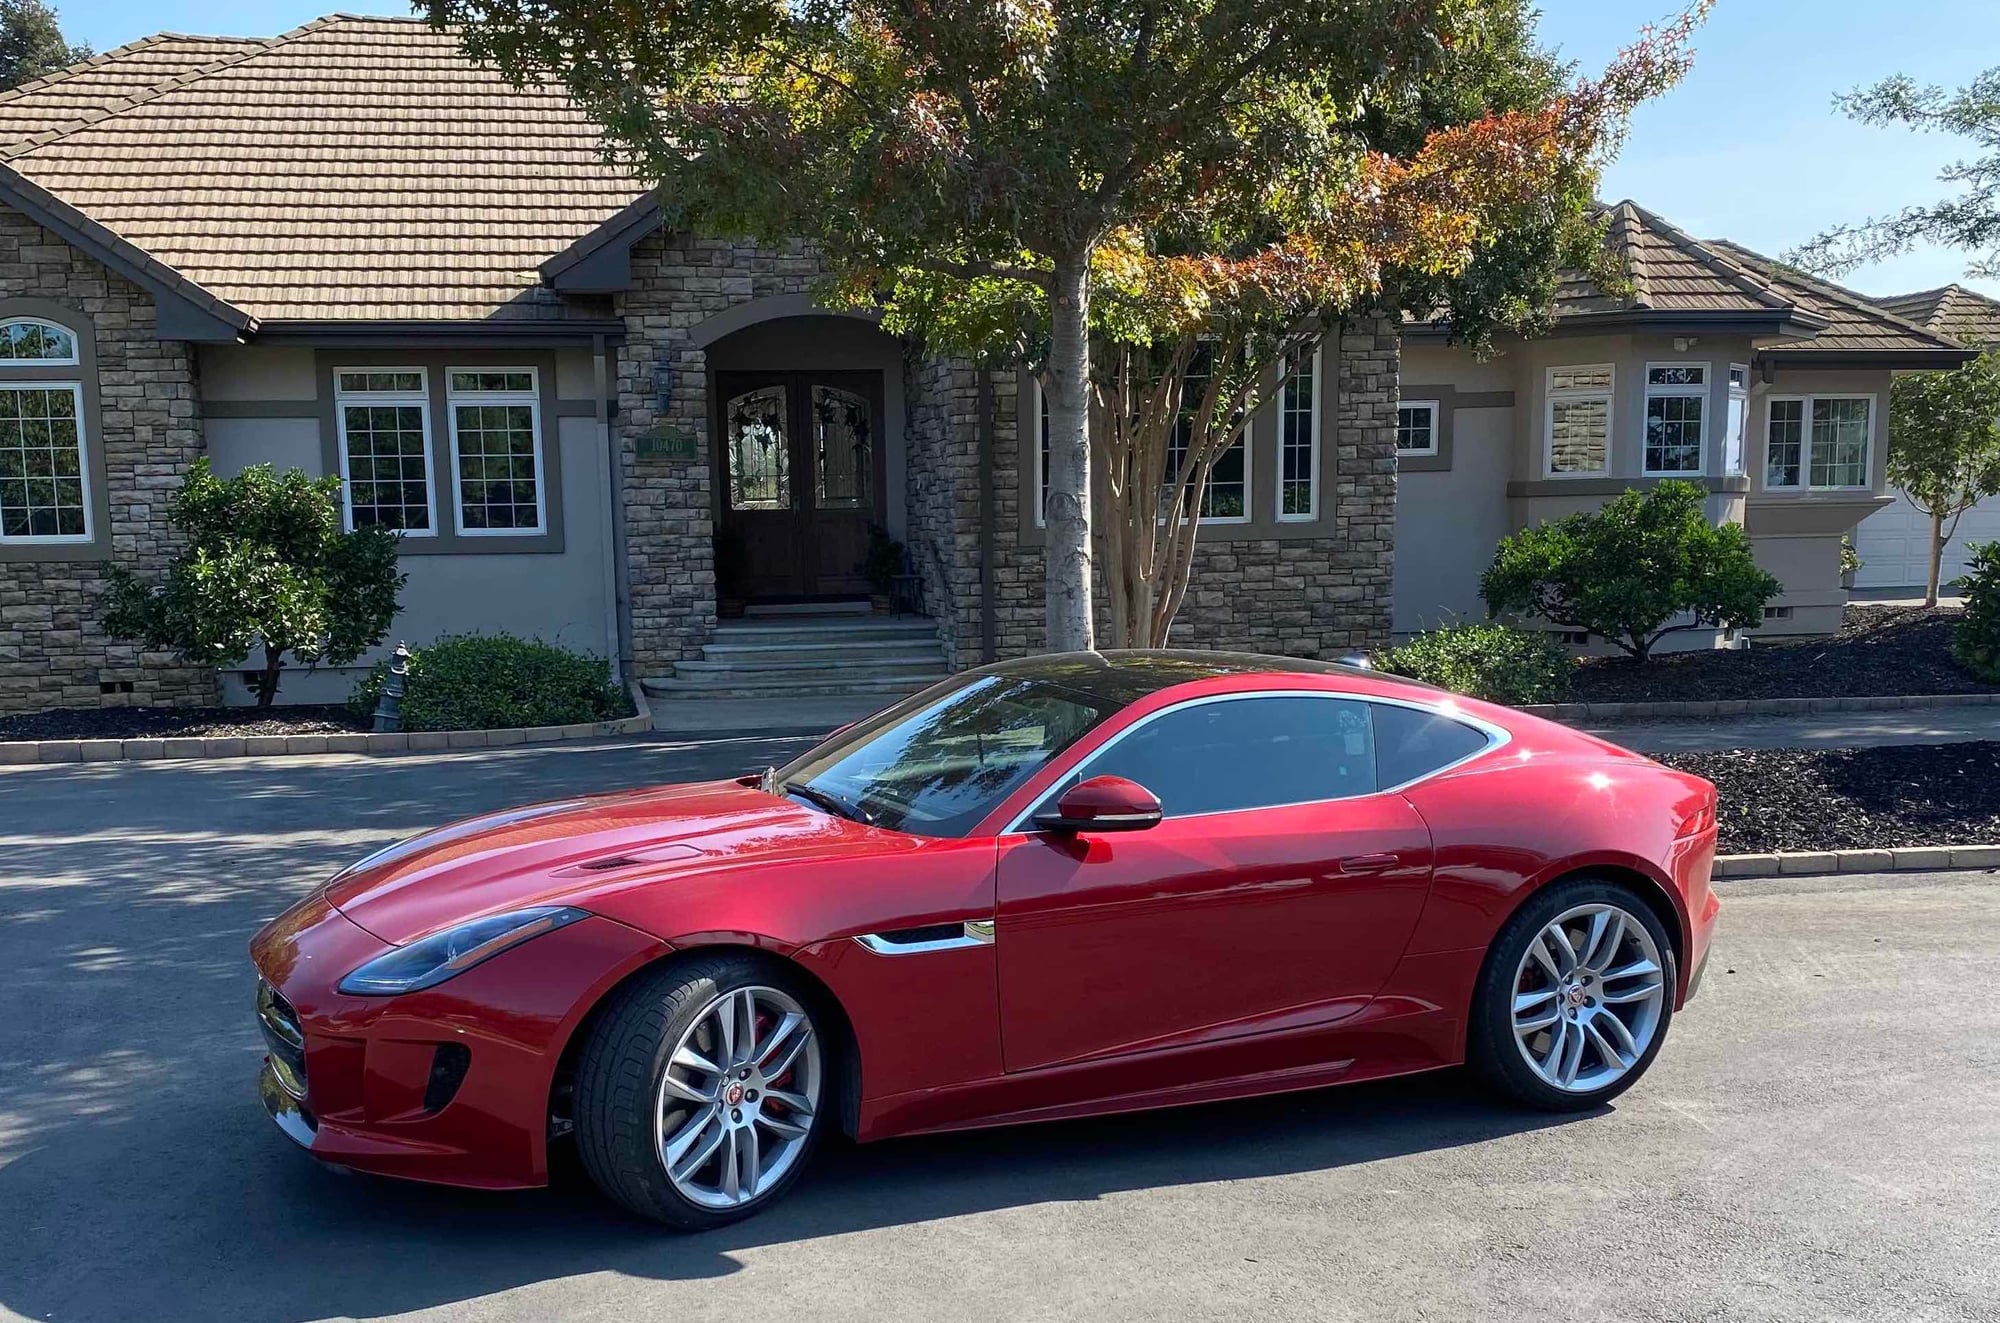 2016 Jaguar F-Type - 2016 Jaguar F-Type R, 5,500 miles, AWD. V-8 supercharged with 550hp - Used - VIN SAJWJ6DL0GMK29877 - 8 cyl - AWD - Automatic - Coupe - Red - Gilroy, CA 95020, United States